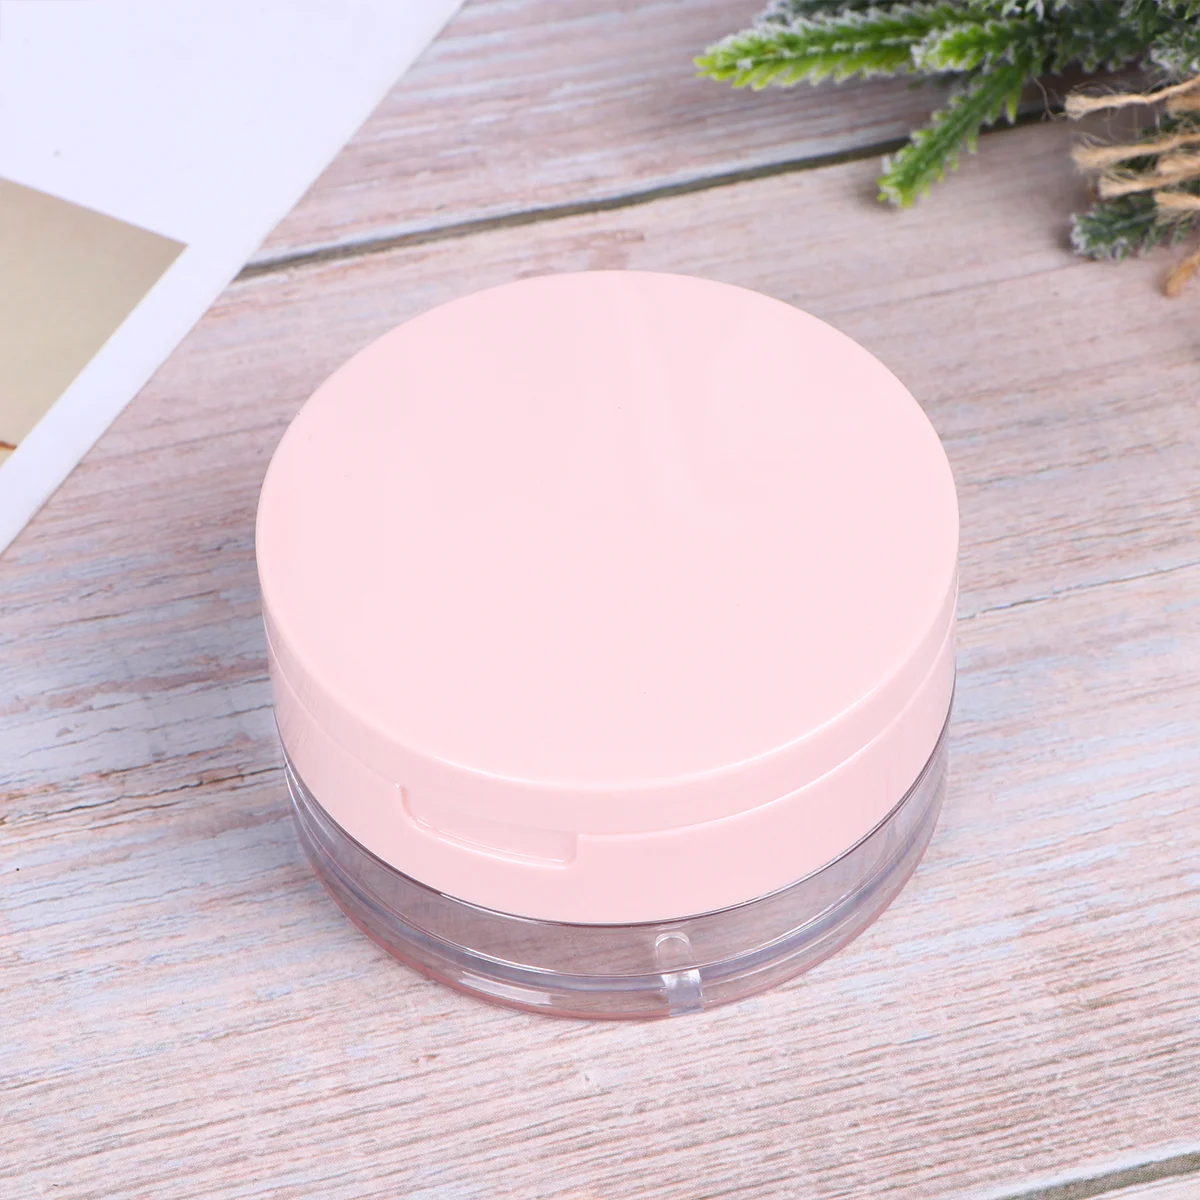 Small Reusable Powder Container Powder Portable Makeup Jar Empty Toner Puff pencil card holder box container desk stationery organizer reusable makeup organizer storage containers for remote watercolor